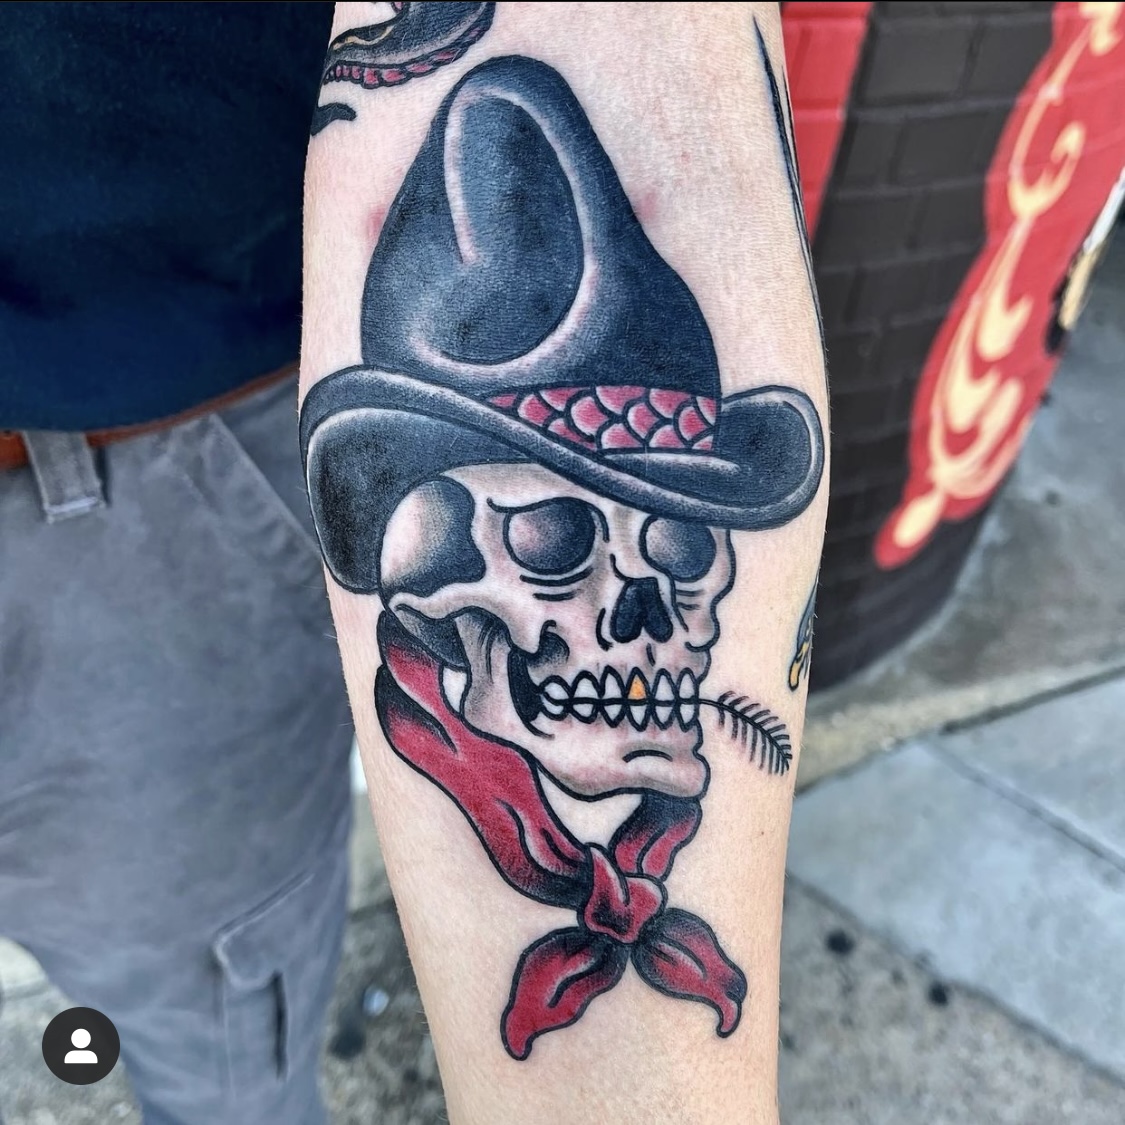 Tattoo of a skull with a cowboy hat from dallas tattoo shop